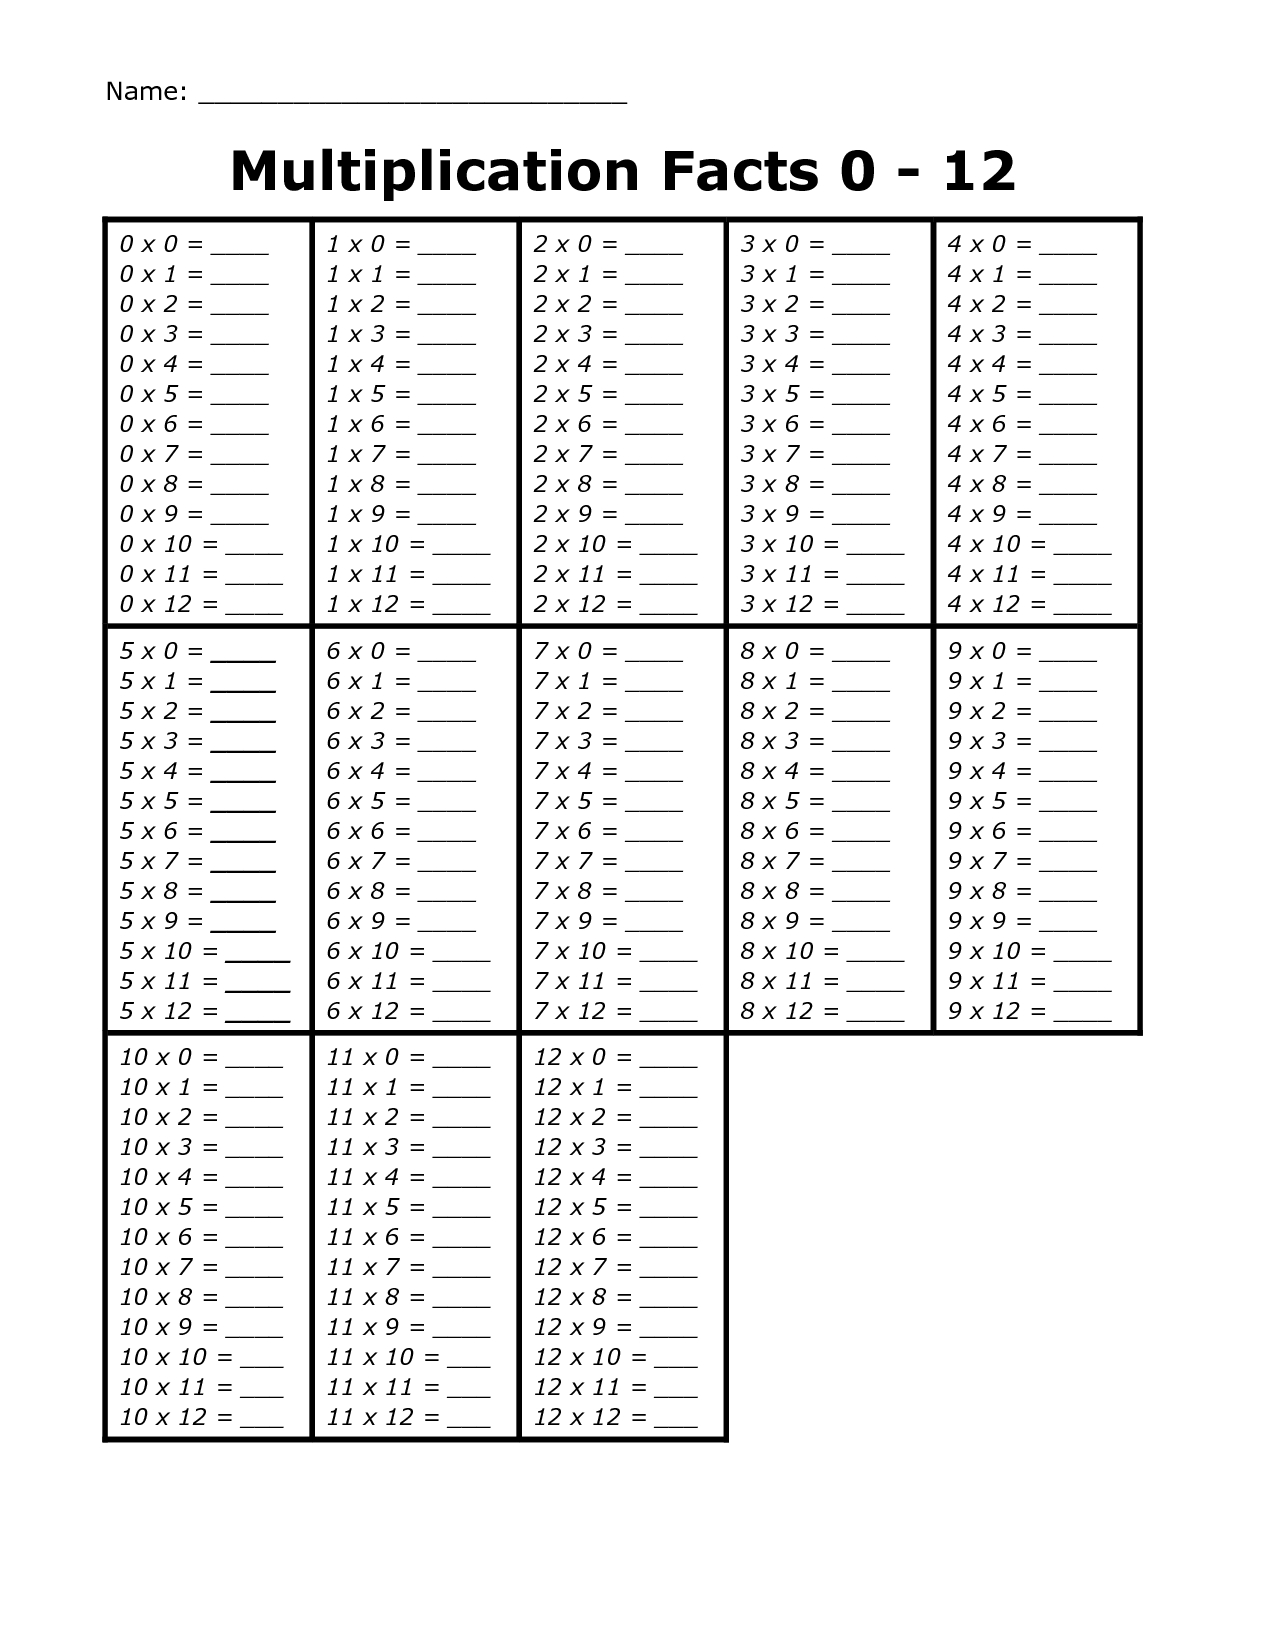 4-times-table-worksheets-printable-activity-shelter